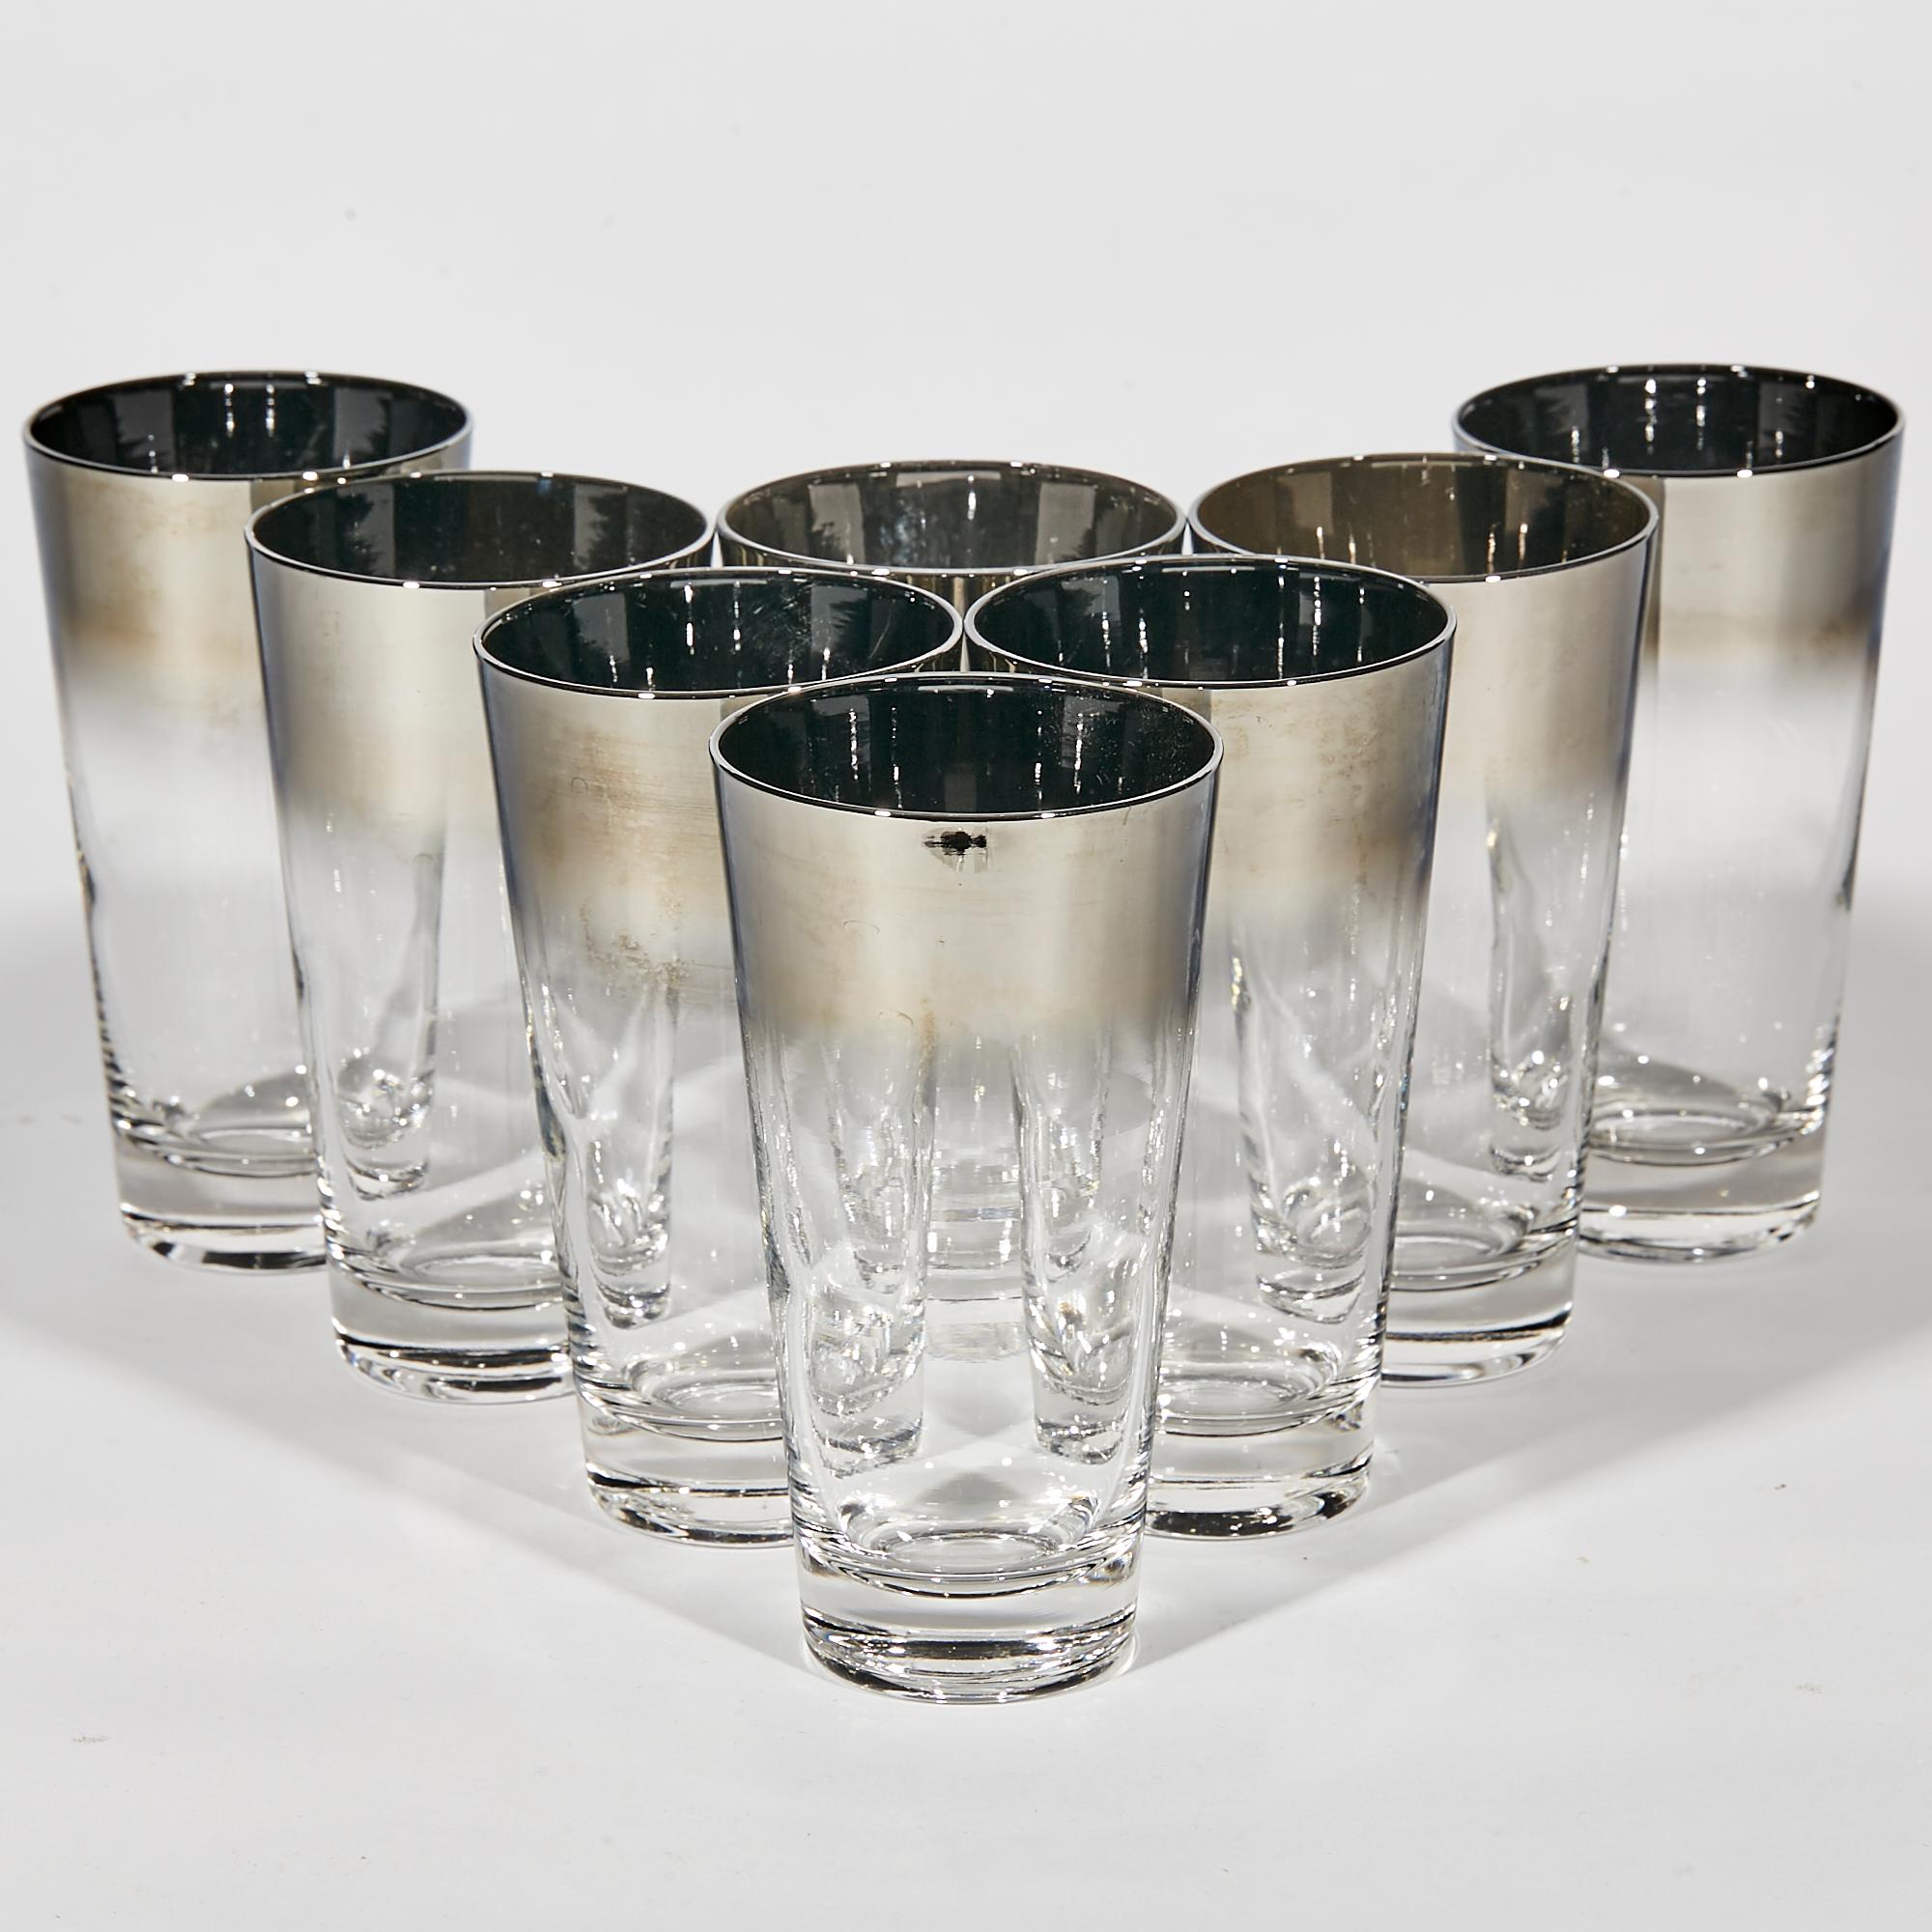 Vintage set of 8 silver-fade tall glass bar tumblers. No marks. In very good used condition.